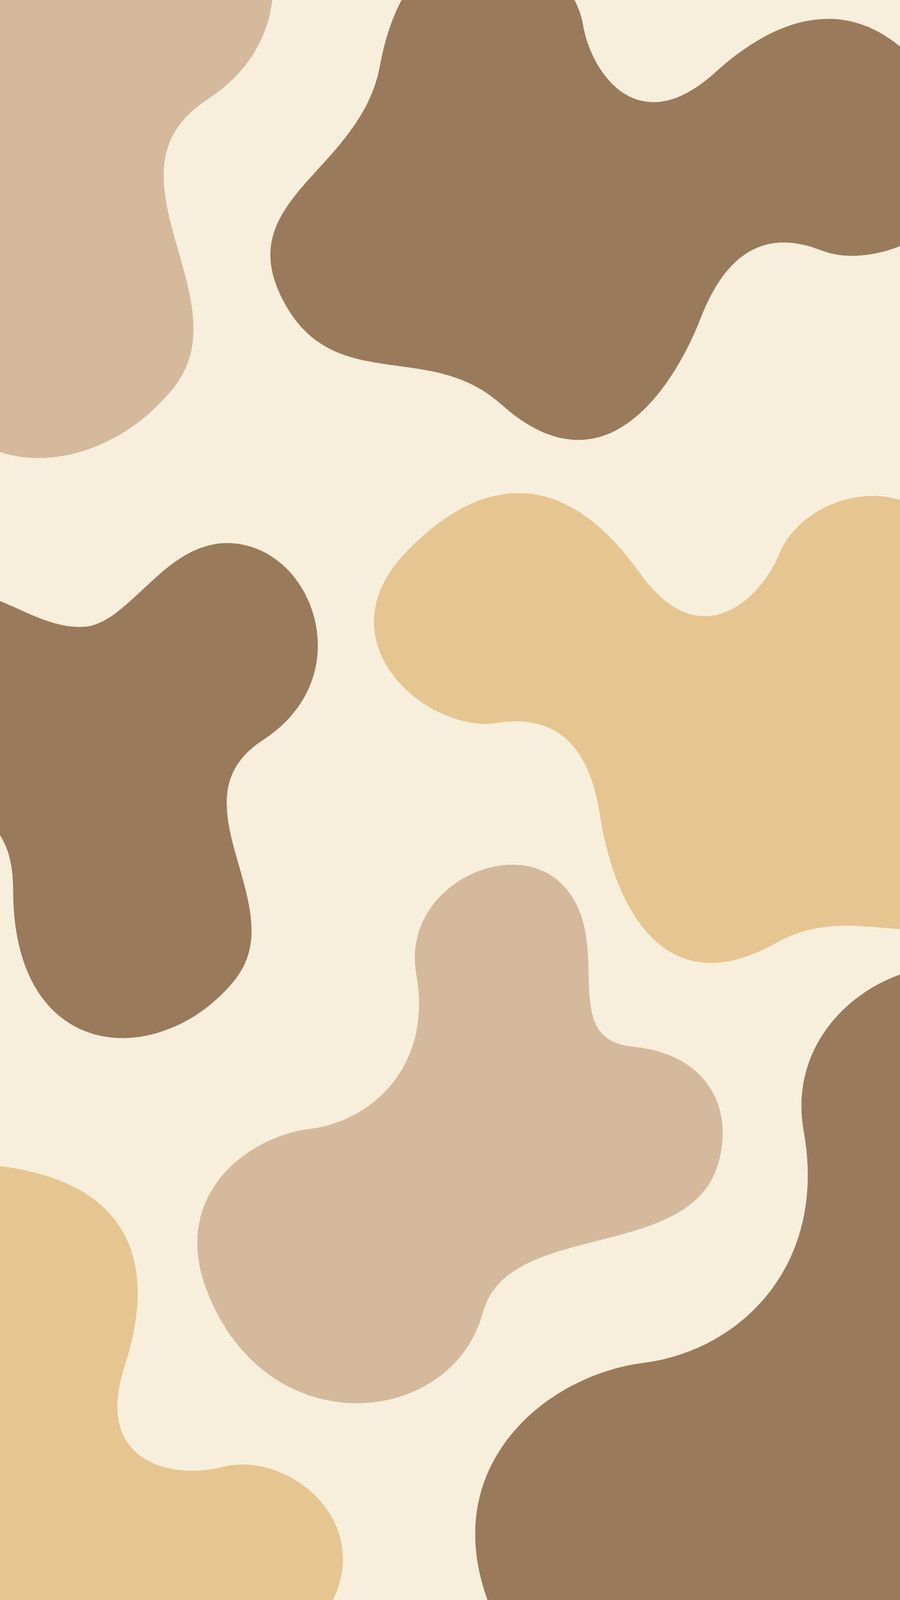 IPhone wallpaper with abstract shapes in brown tones - Bestie